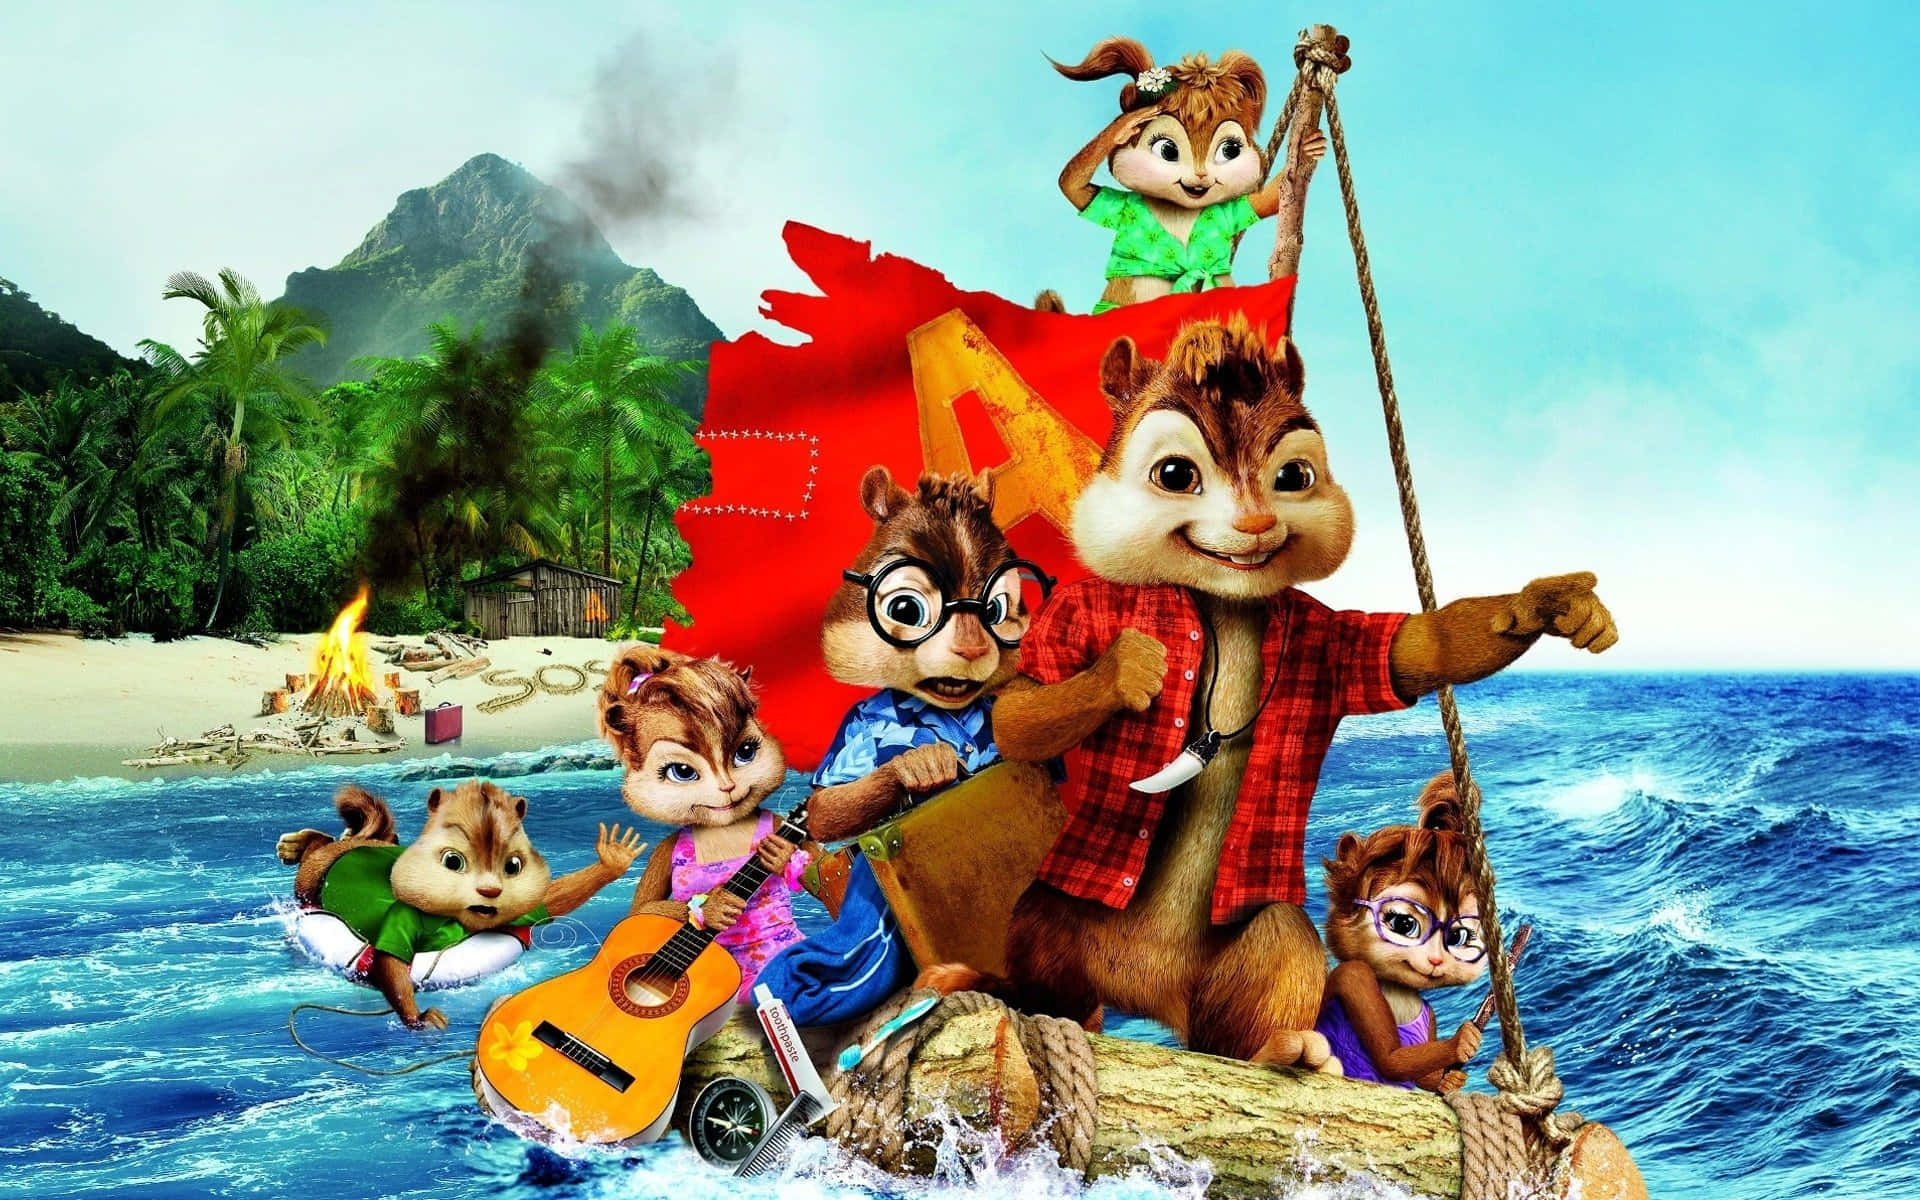 "Come join Alvin and the Chipmunks for adventure and fun!"